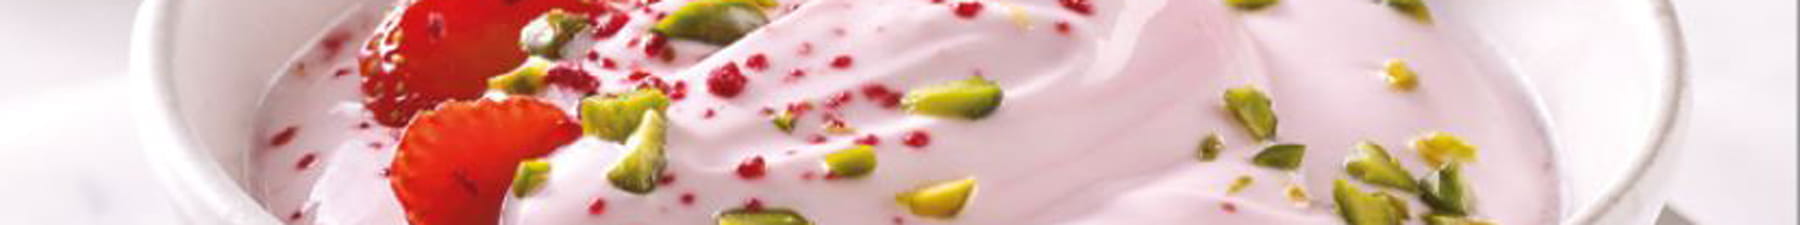 Yogurt in bowl with strawberry and pistachio